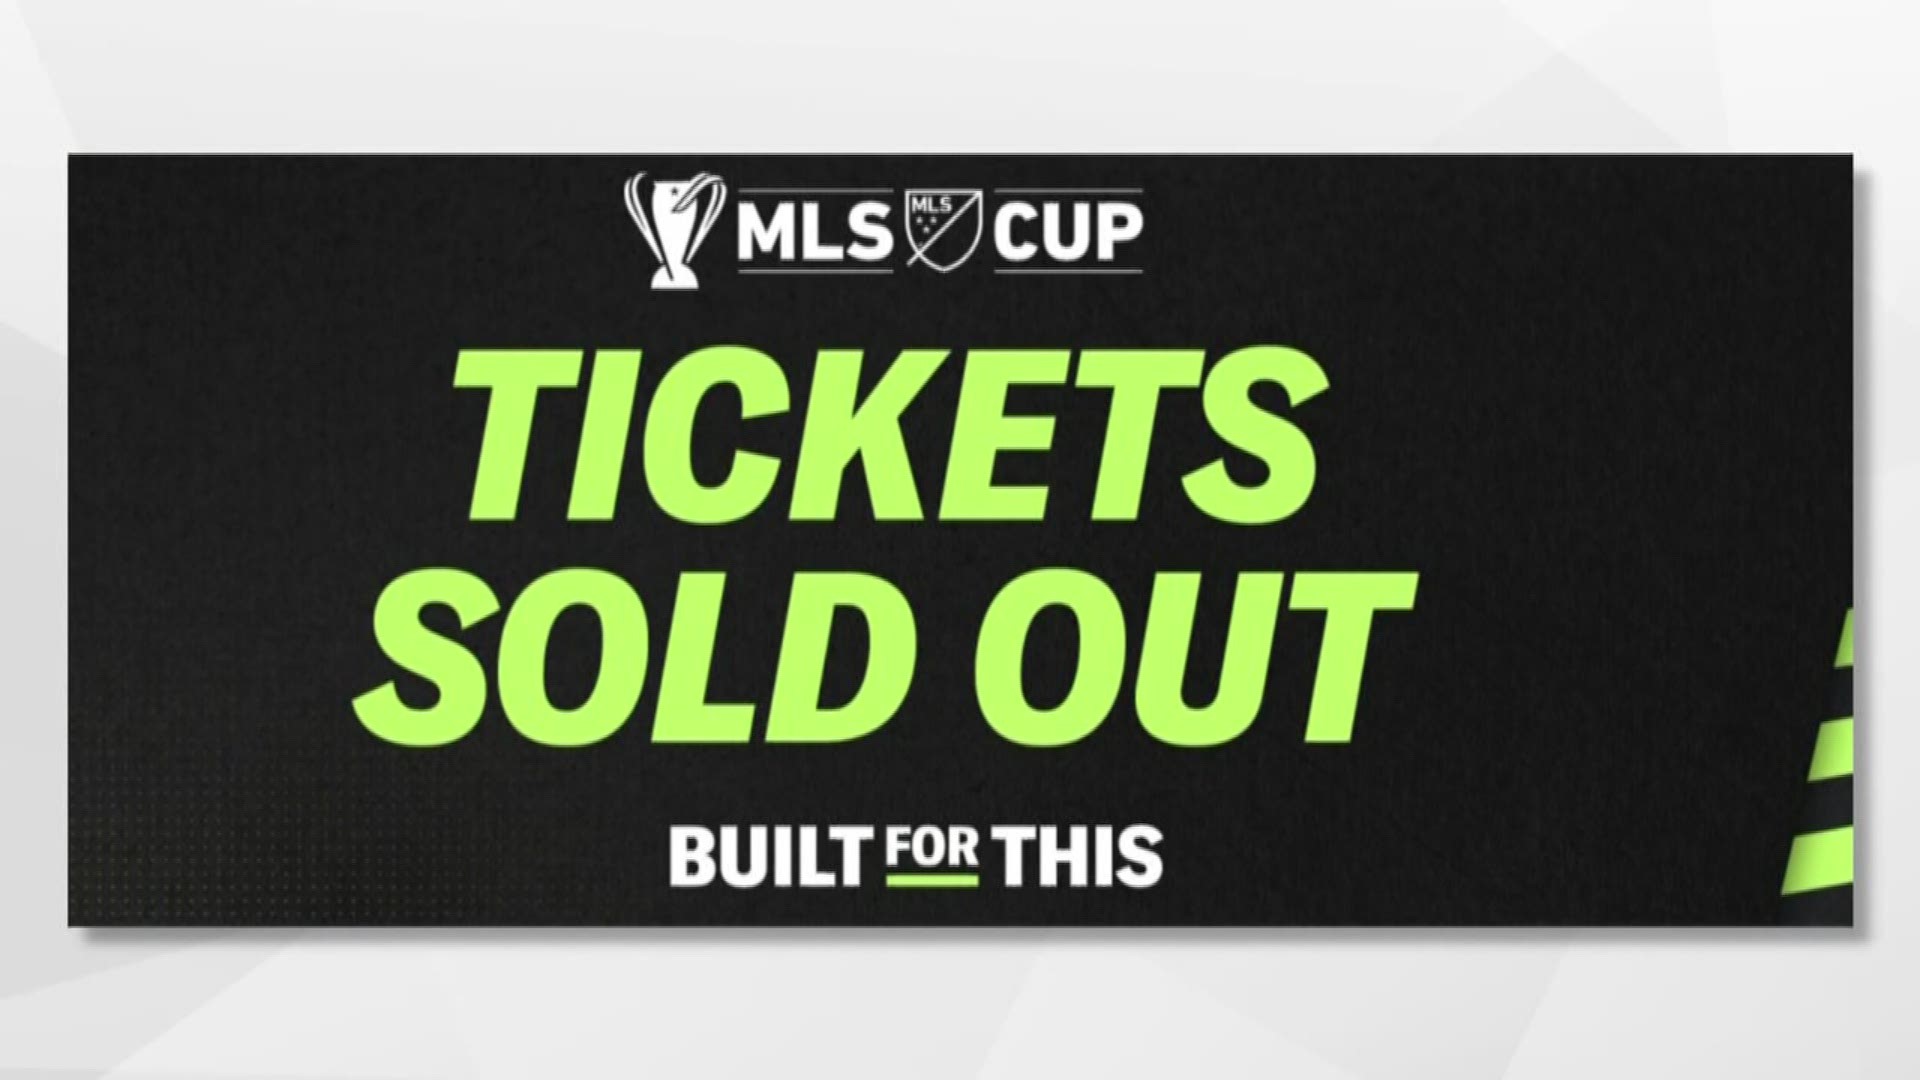 Ticket sales for the Major League Soccer championship in Seattle on Nov. 10 went on sale Friday and quickly sold out.